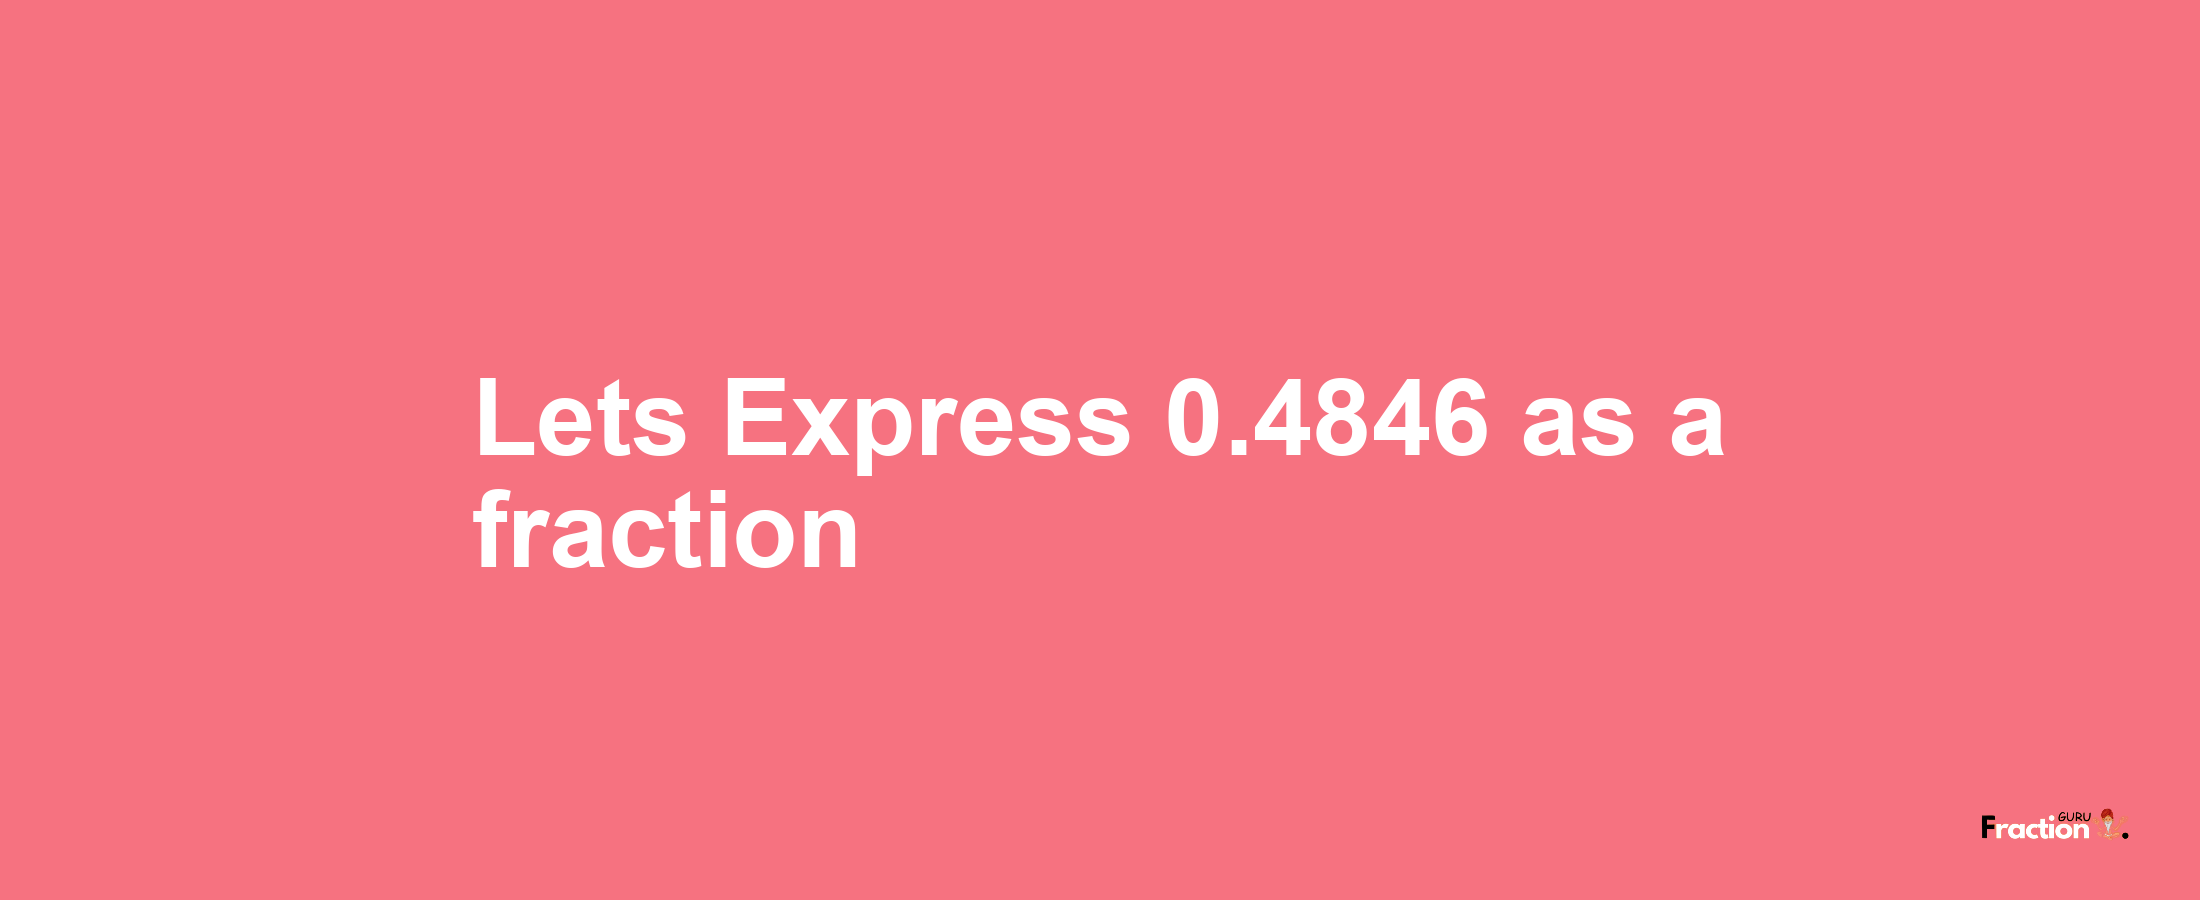 Lets Express 0.4846 as afraction